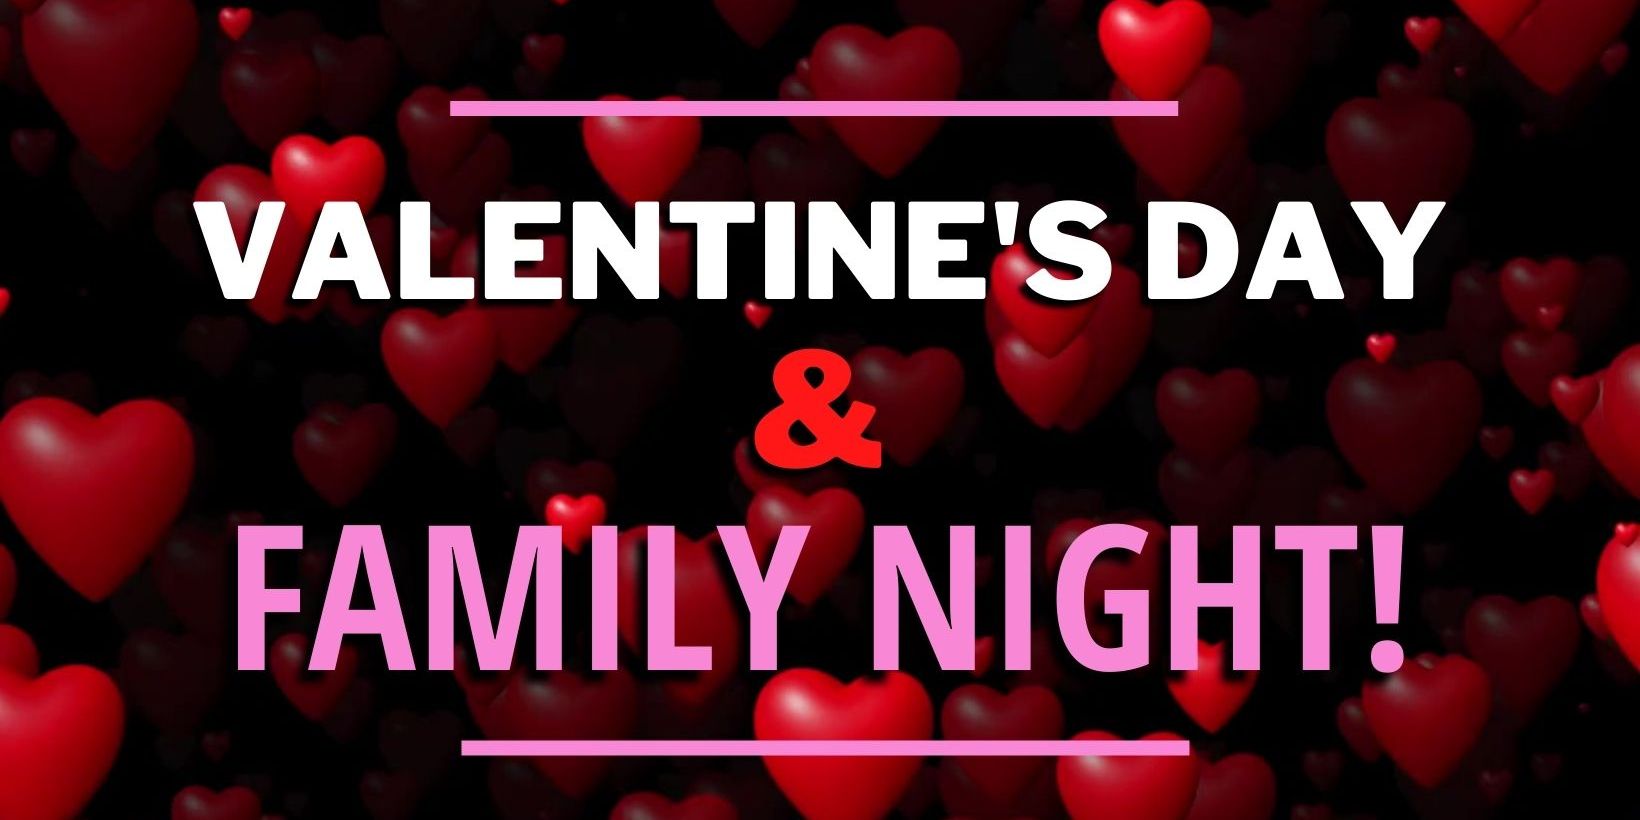 Valentine's Day Family Night promotional image